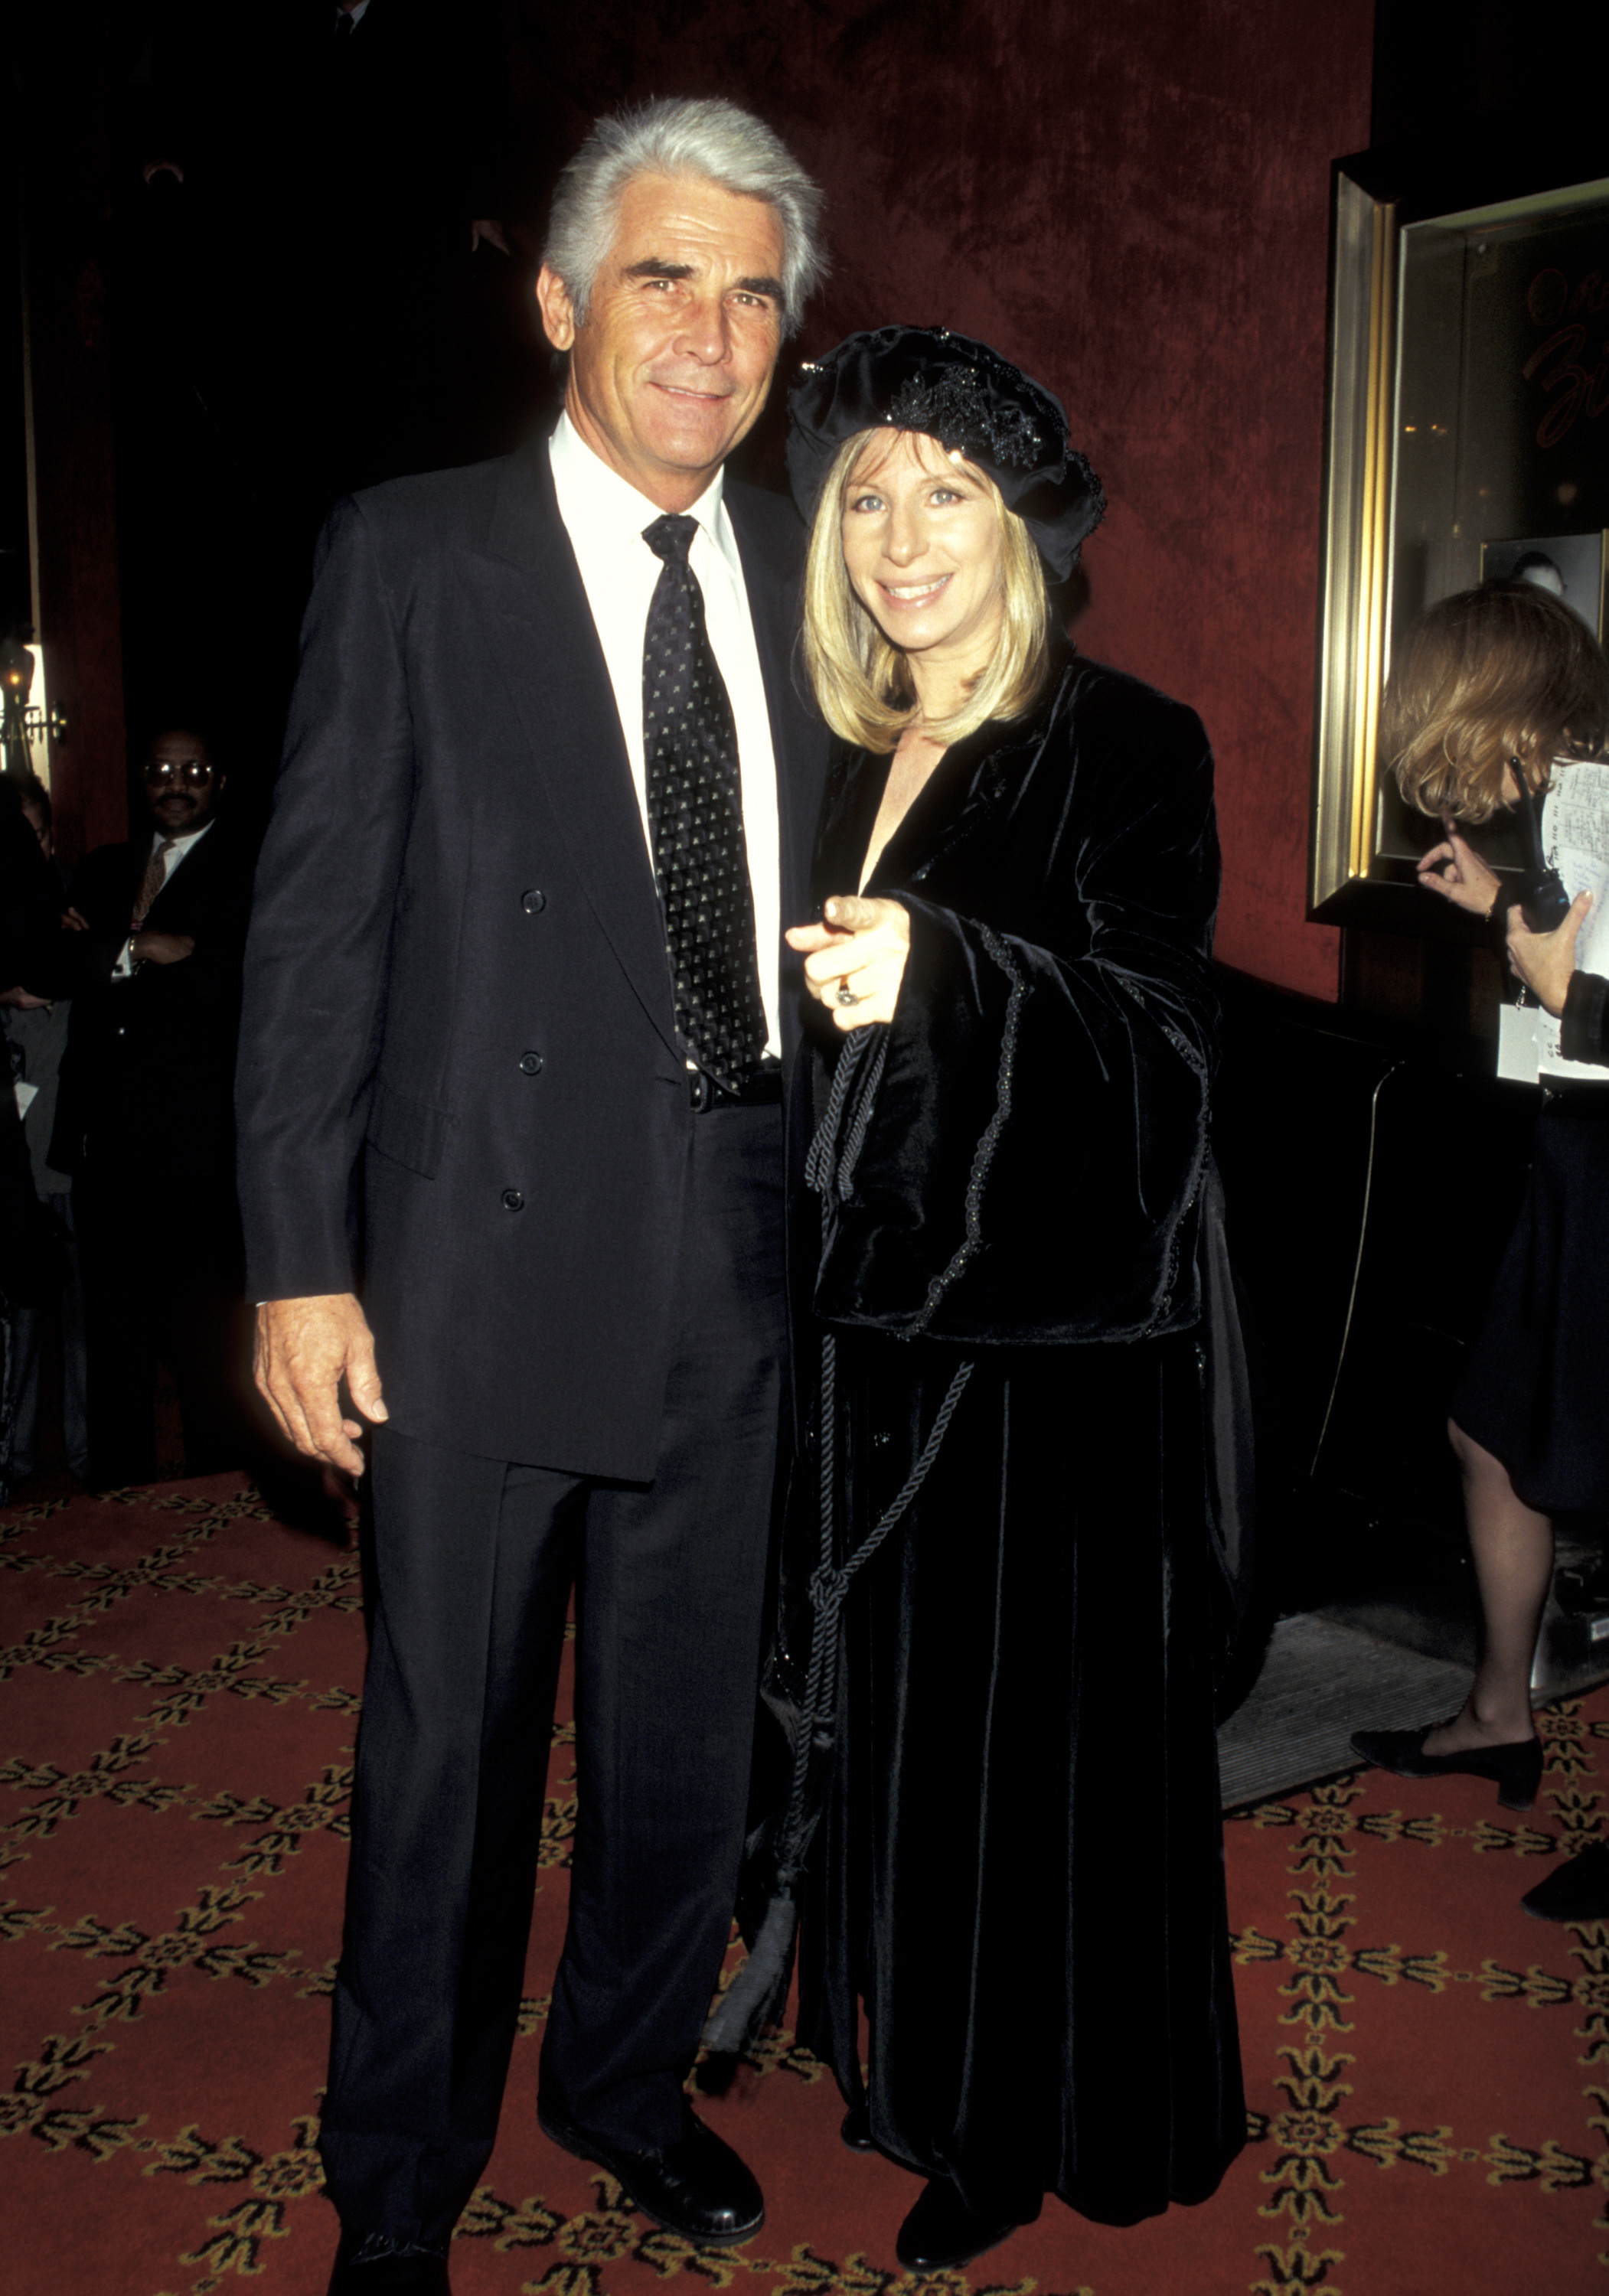 James Brolin and Barbra Streisand in 1996 | Source: Getty Images